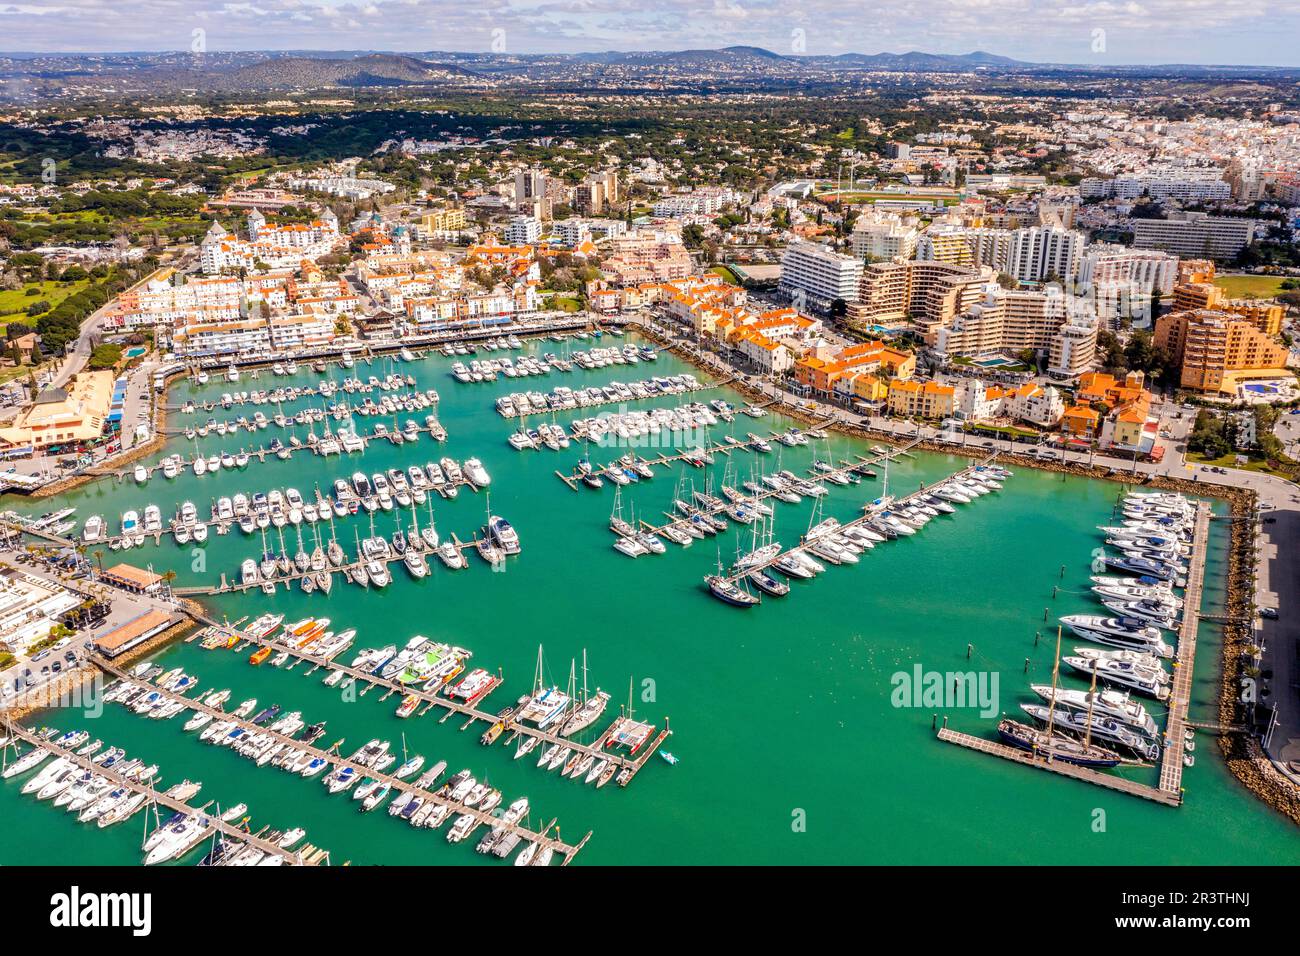 Awesome view of modern, lively and sophisticated Vilamoura Marina, one of the largest leisure resorts in Europe, Vilamoura, Algarve, Portugal Stock Photo